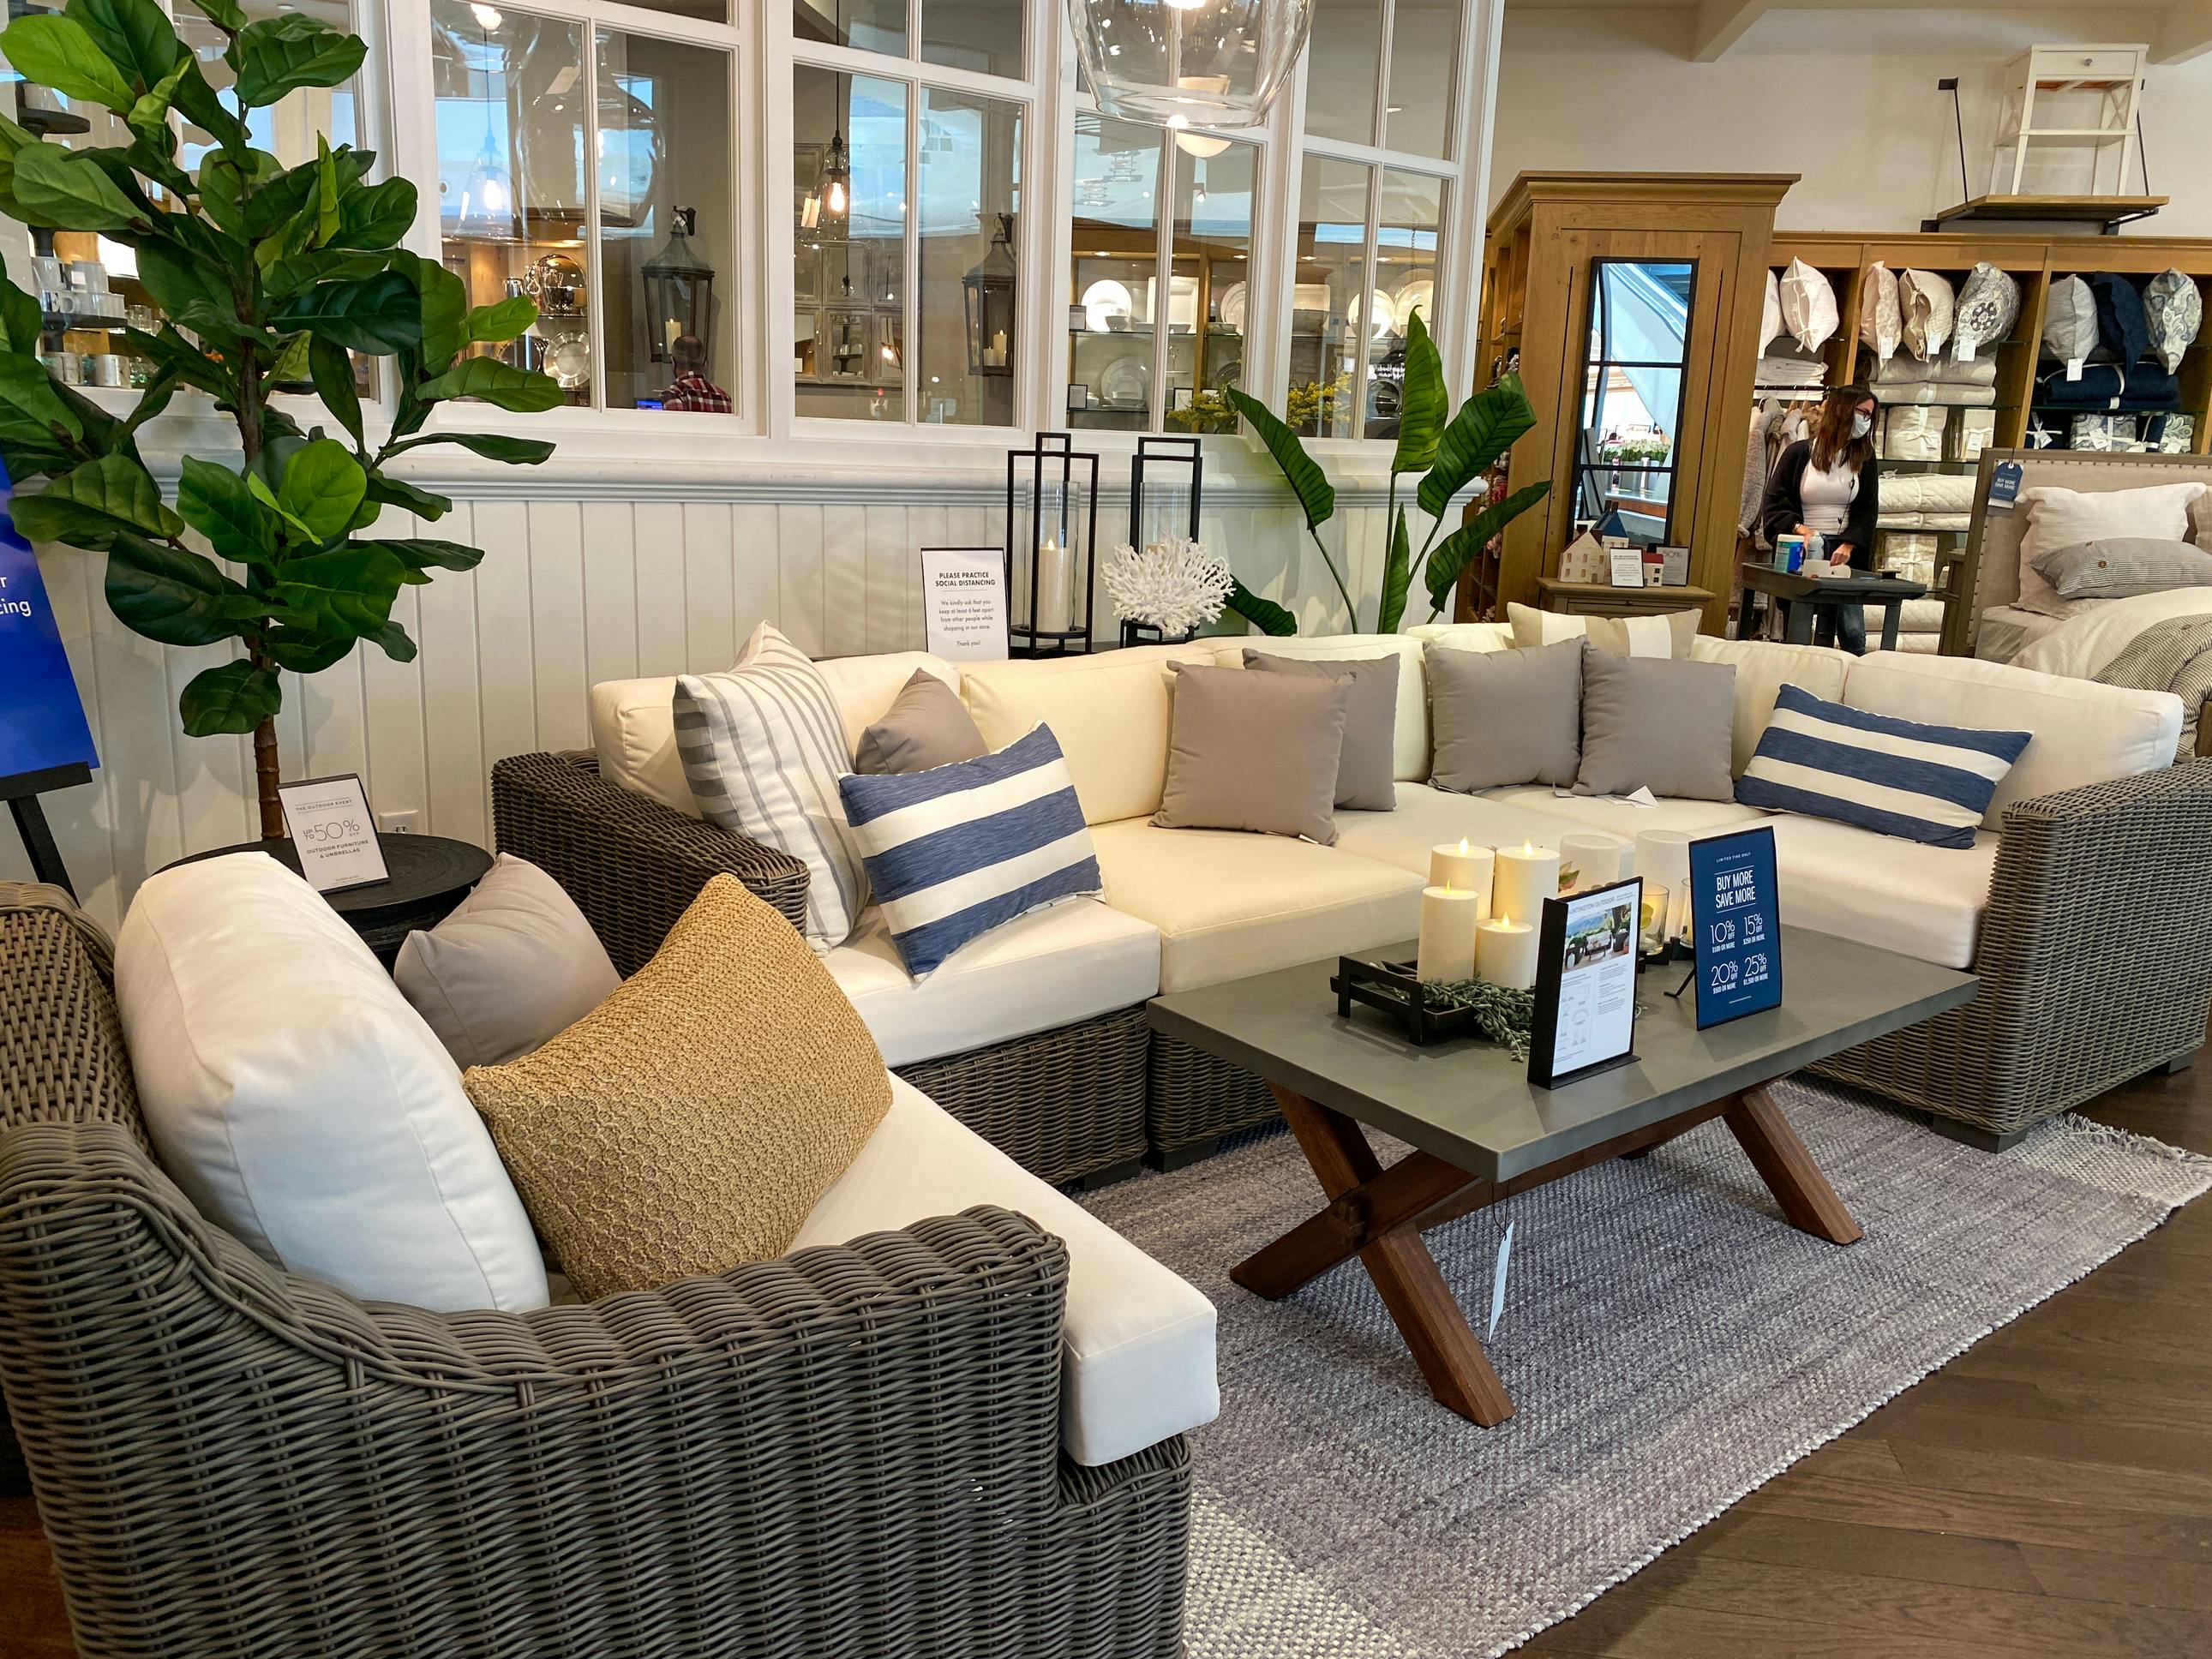 a display of wicker outdoor furniture at a pottery barn outlet store